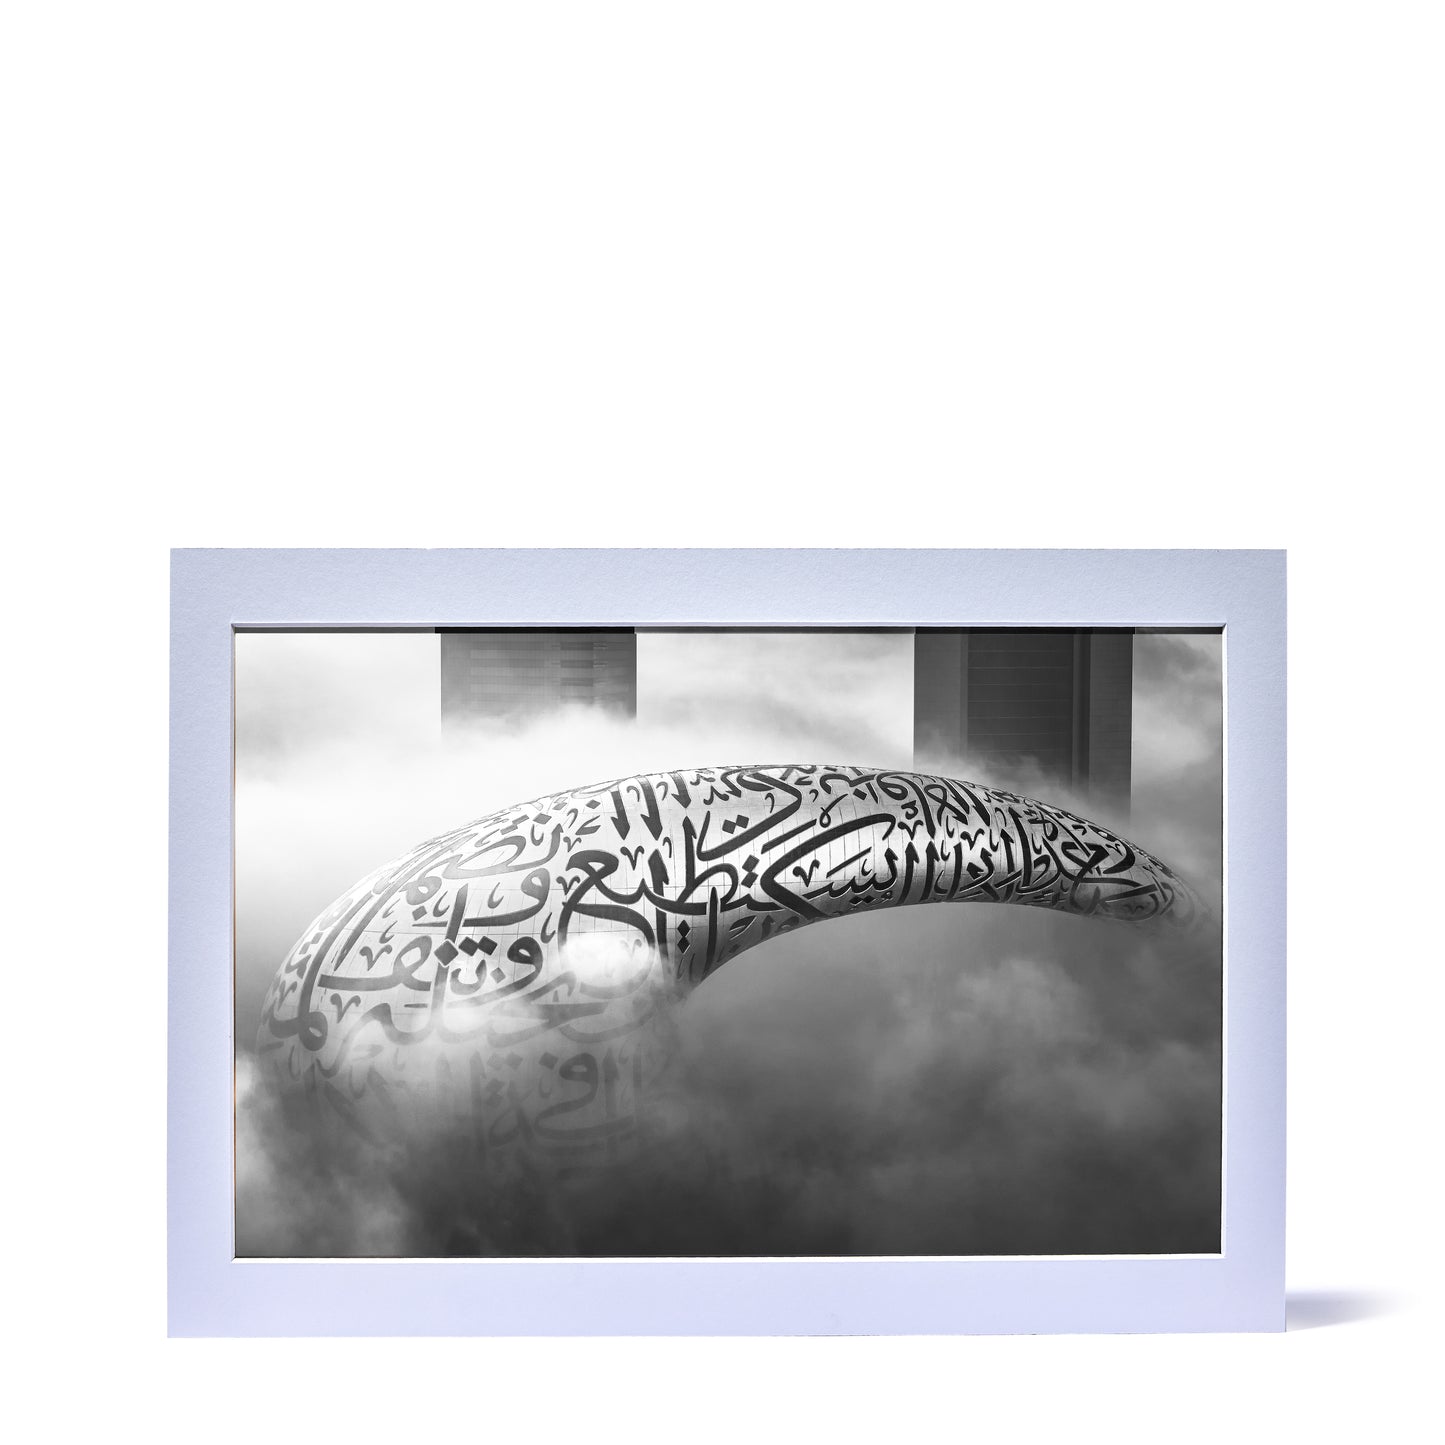 MOTF BUILDING ARC IN CLOUDS MONOCHROME A3 PRINT WITH MOUNT